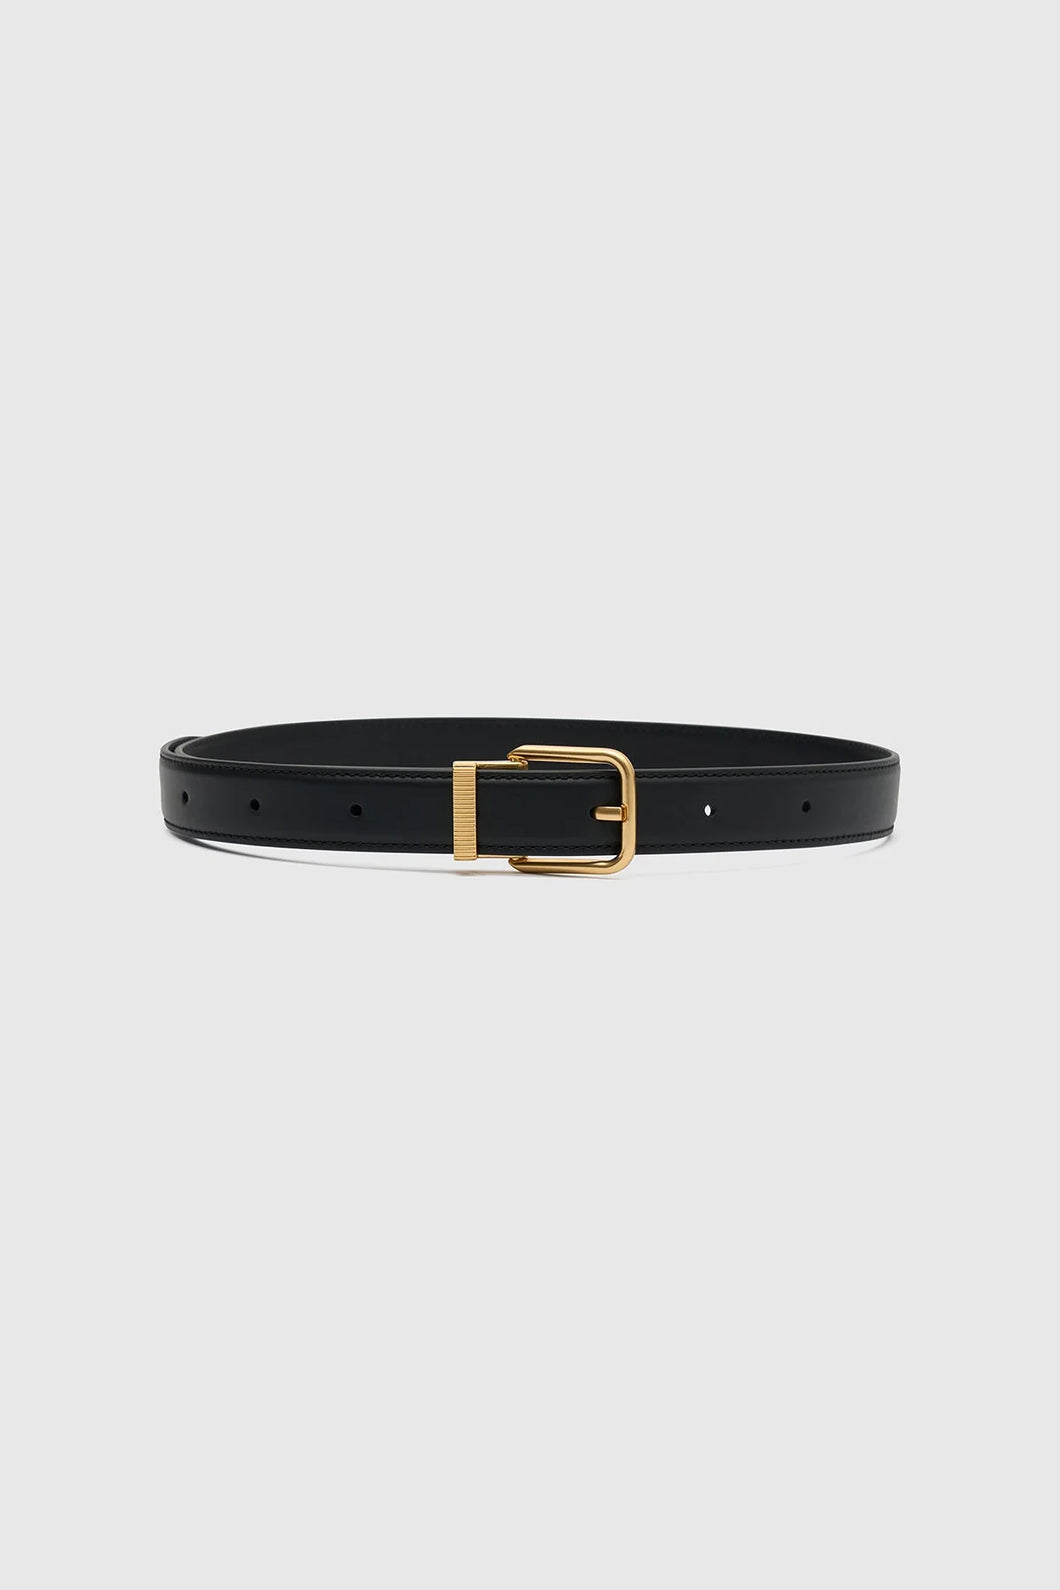 Camilla and Marc Emersyn Belt - Black with Gold  Hyde Boutique   